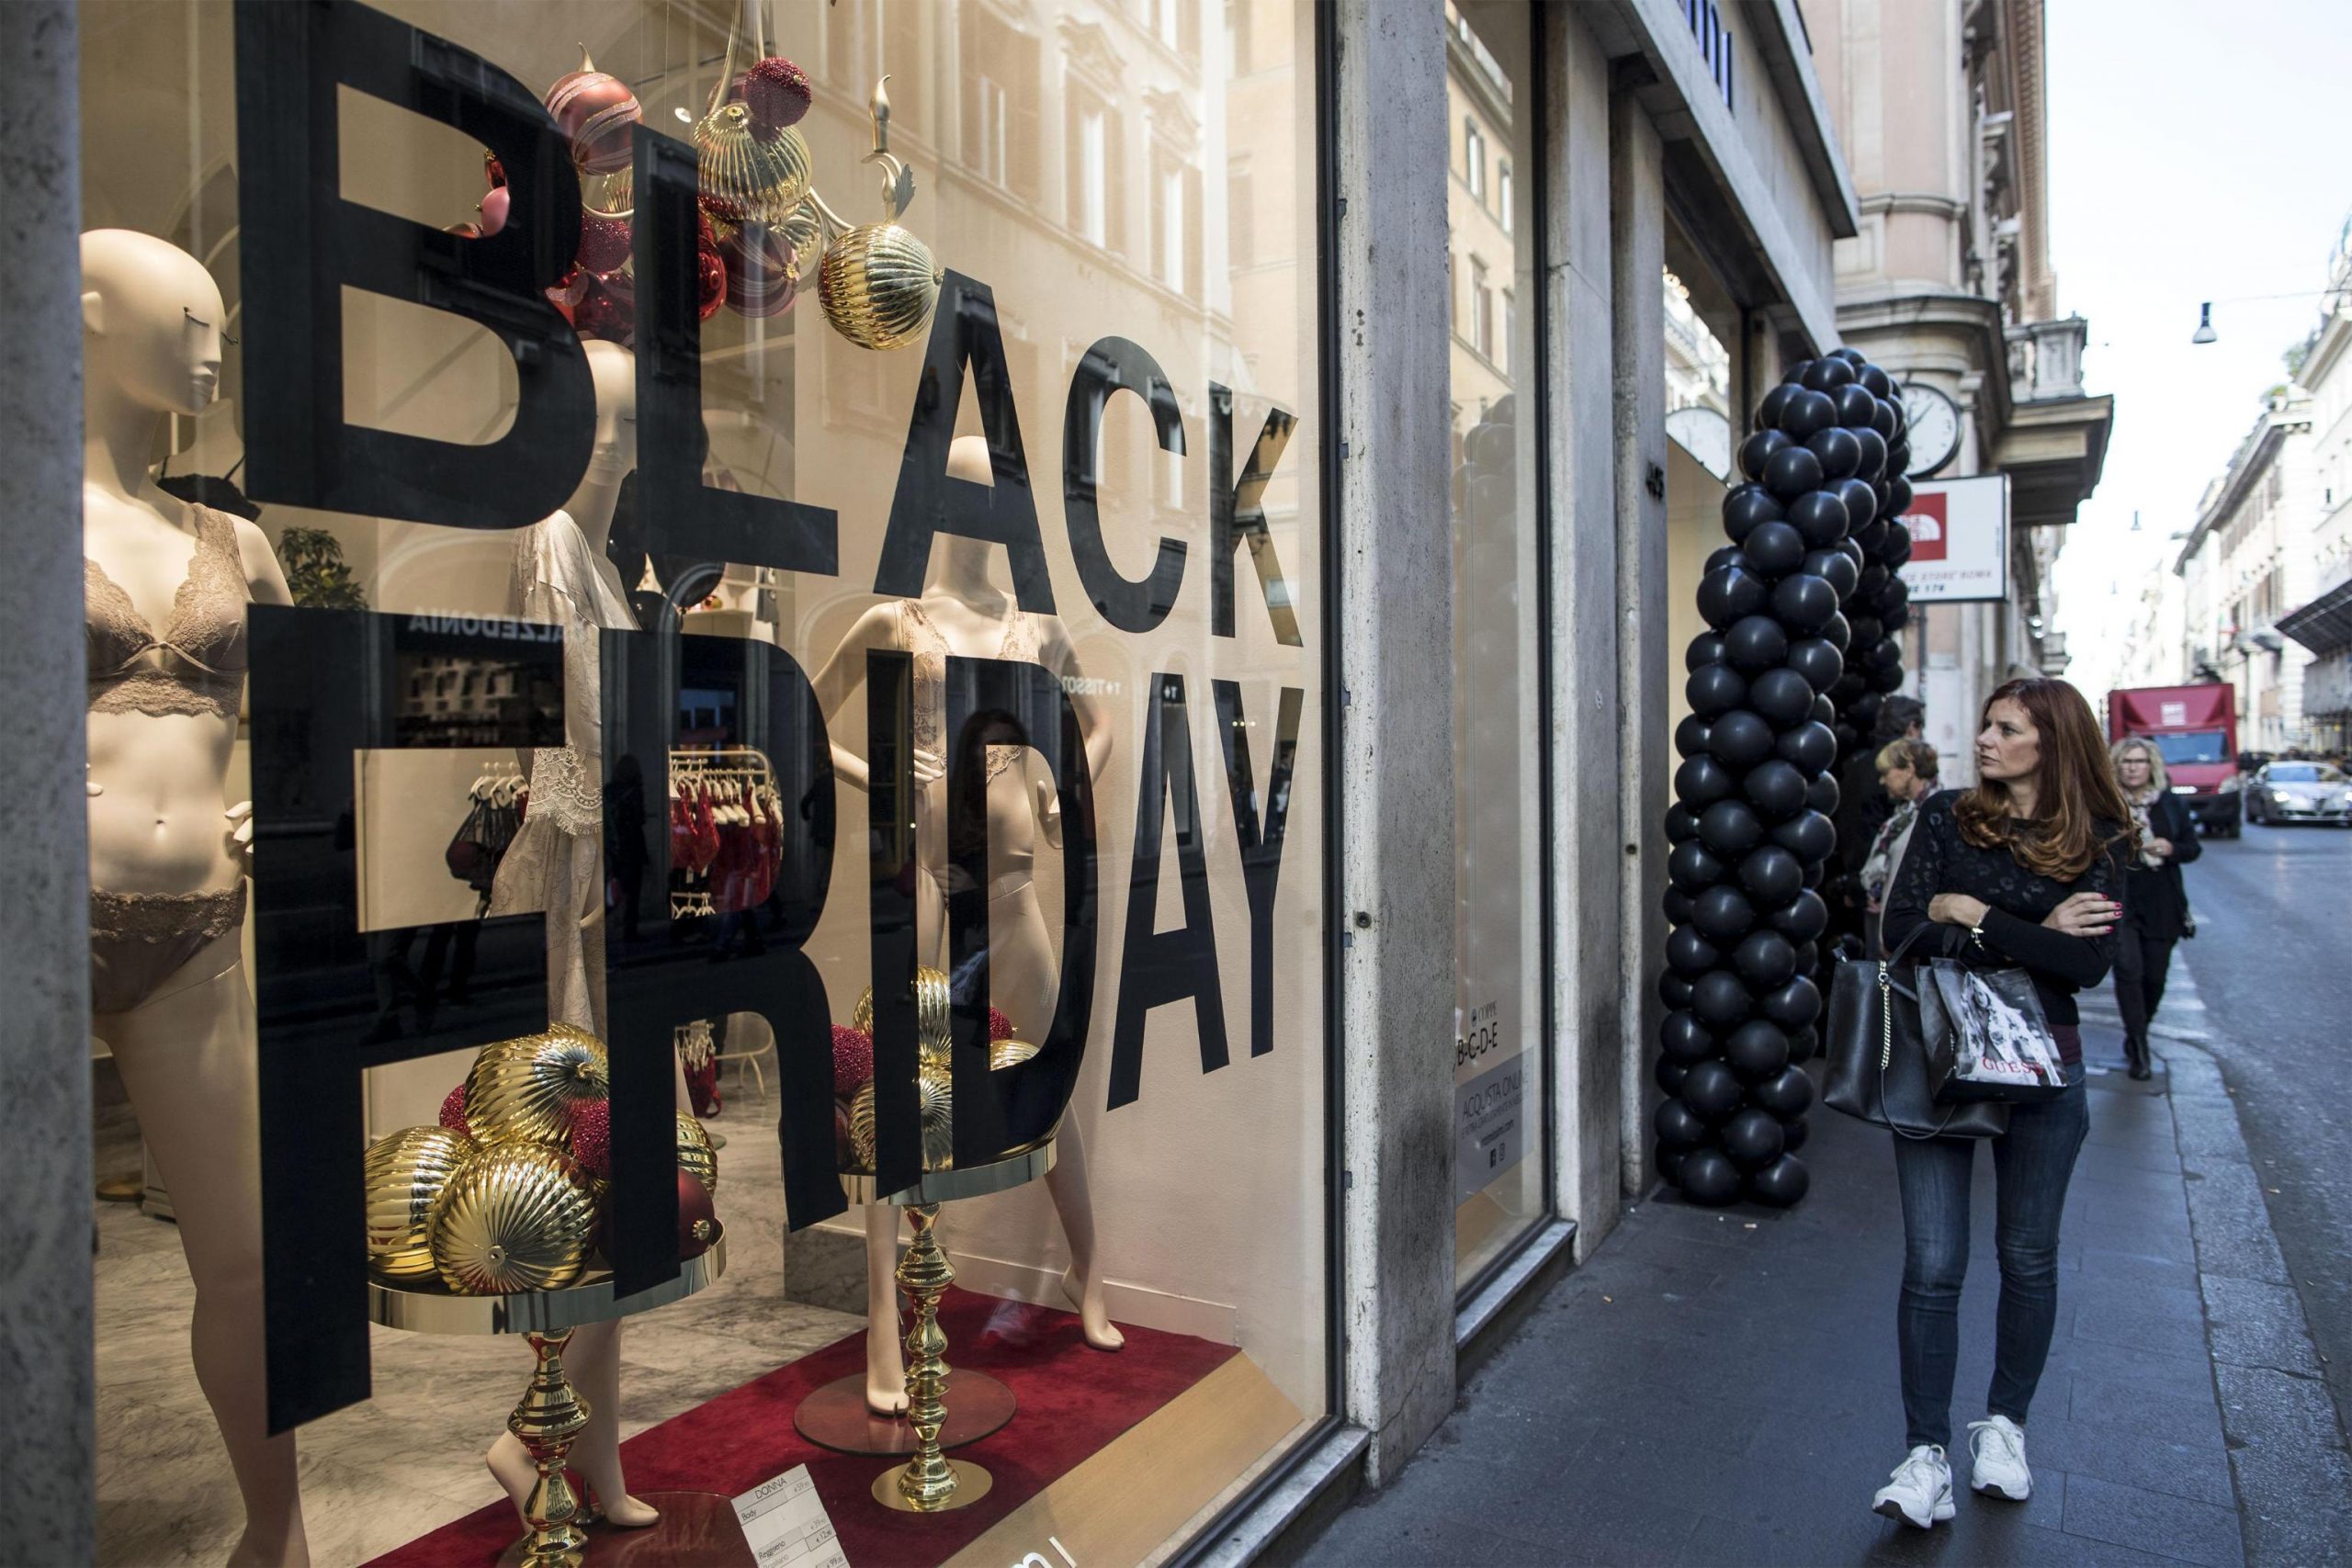 Black Friday and Cyber Monday – 4+1 tips for smart and safe shopping